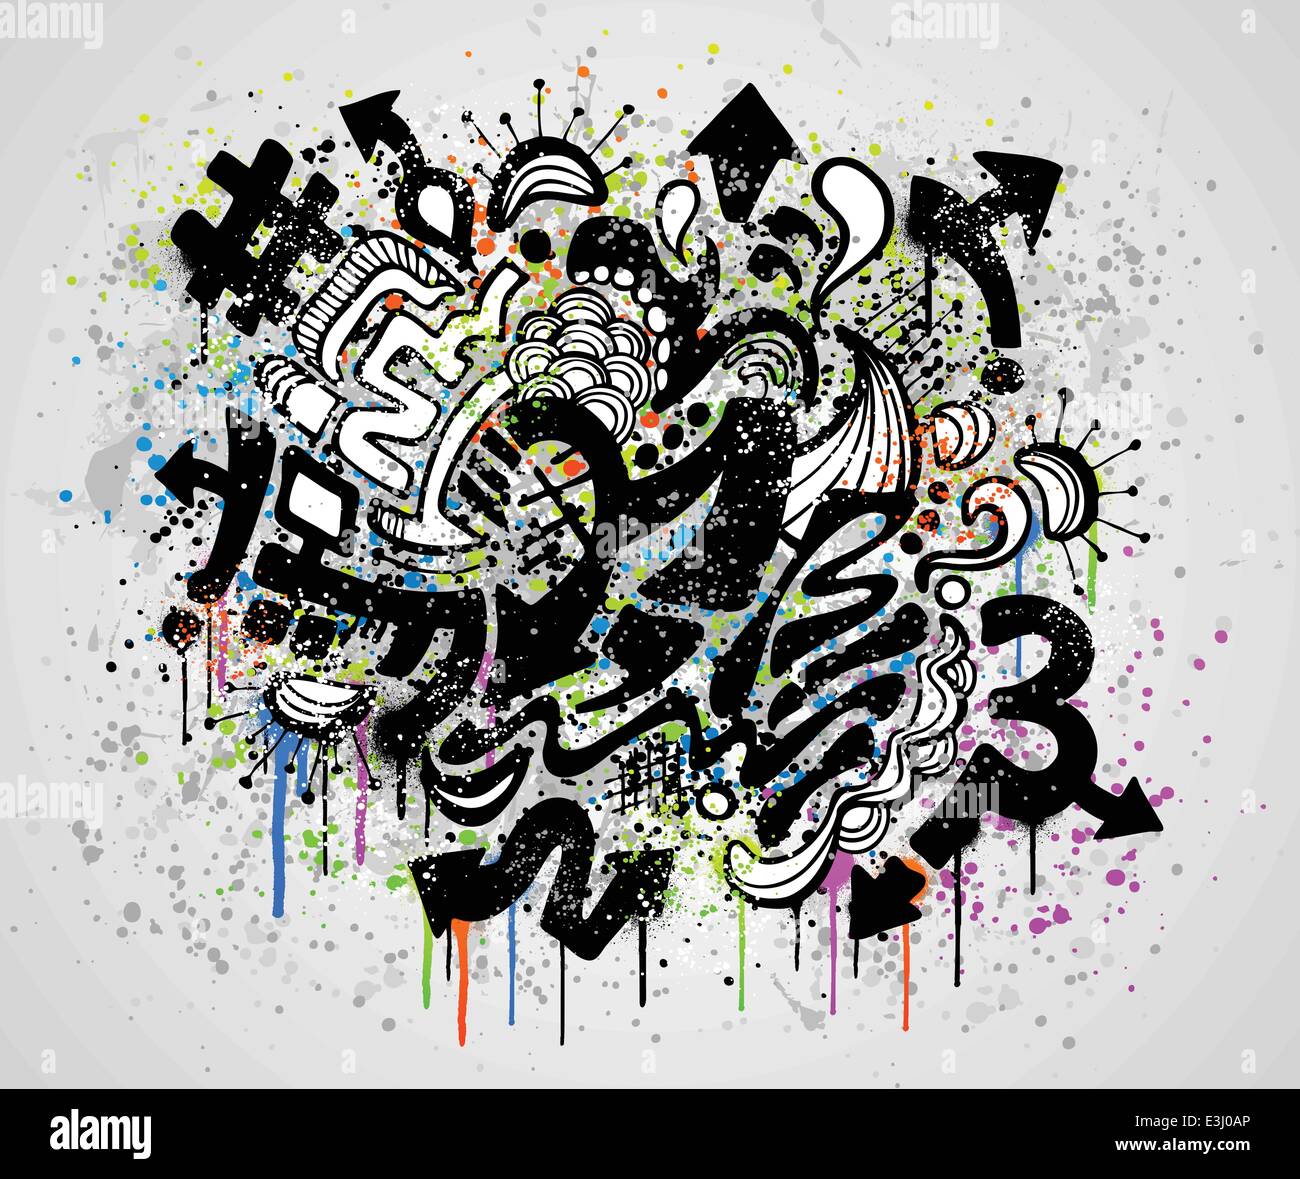 Grunge Background Design With Graffiti And Paint Elements Stock Vector Image Art Alamy